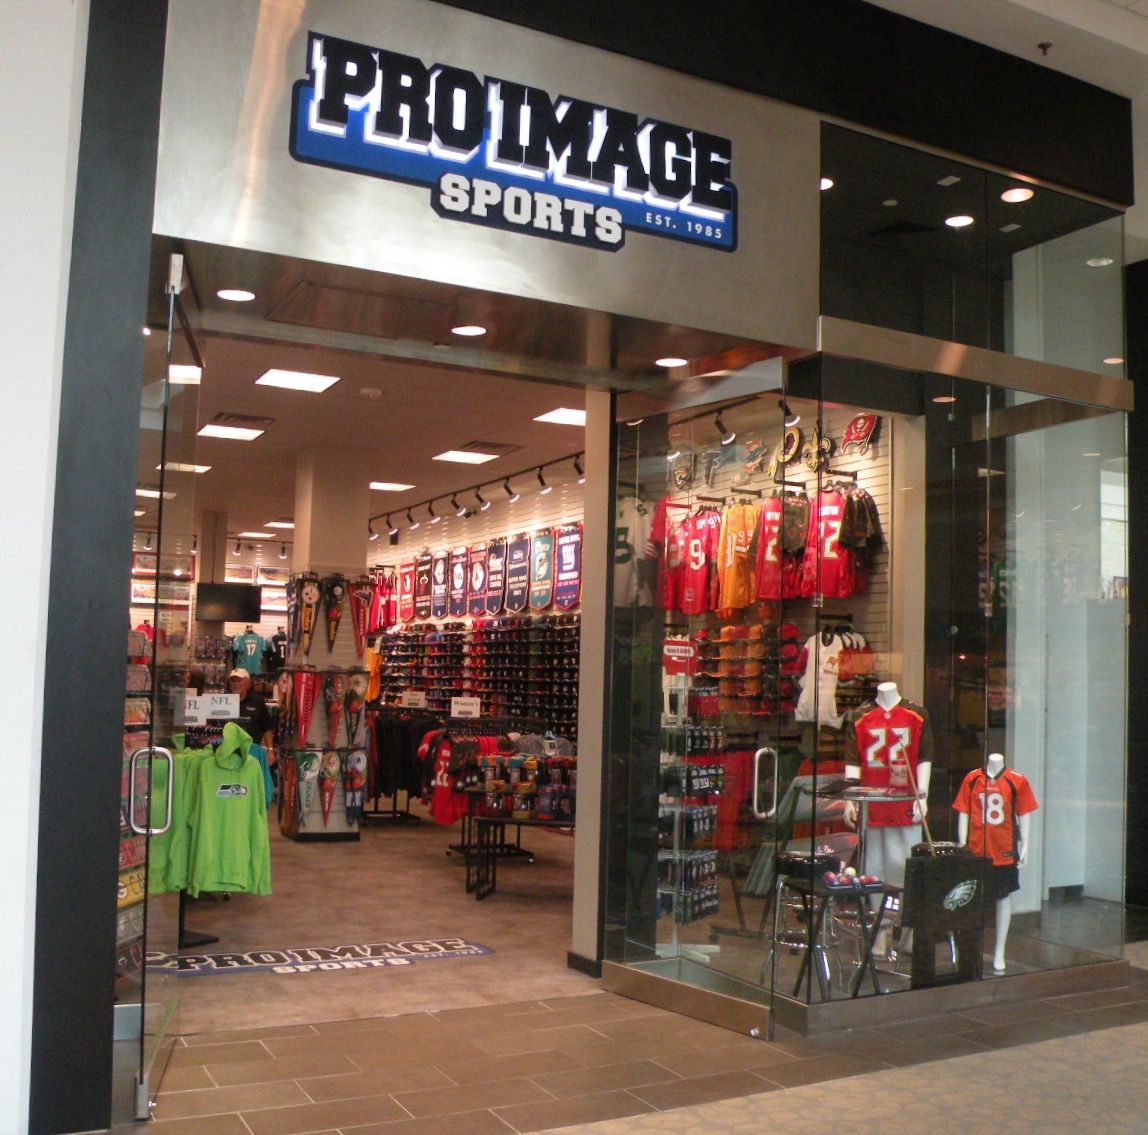 Allen Premium Outlets Welcome Pro Image Sports